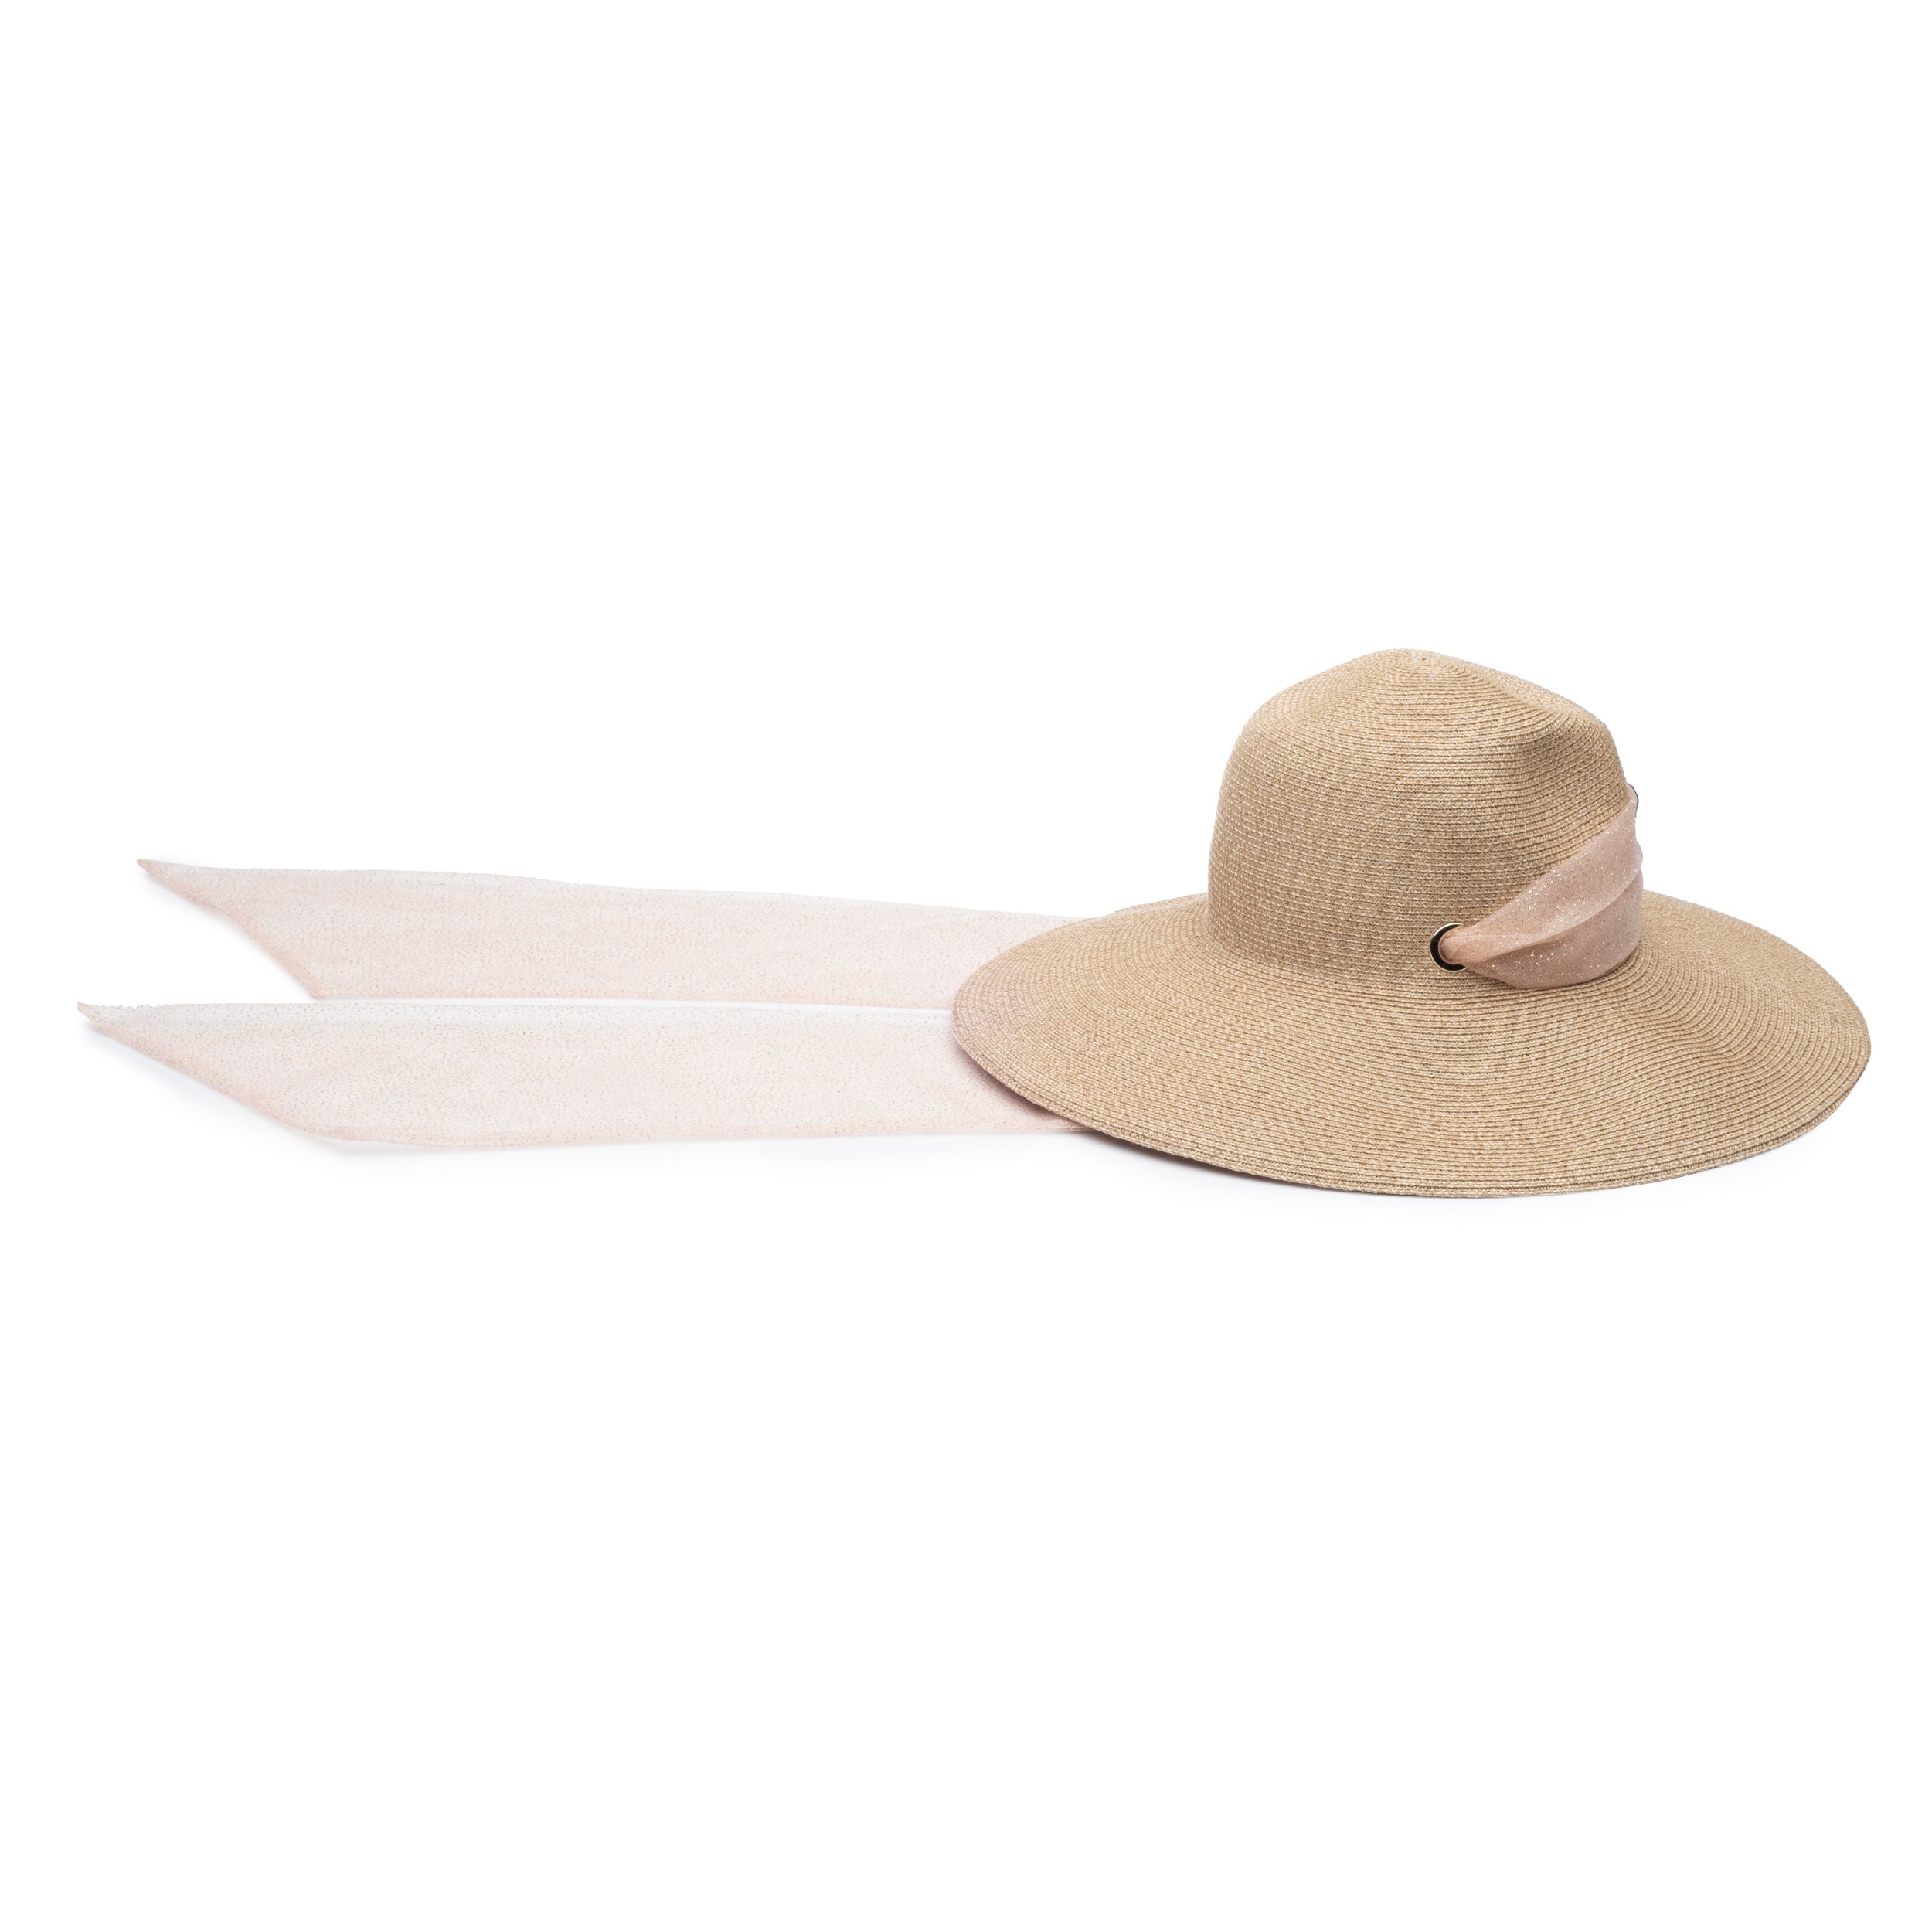 Eugenia Kim Cassidy packable fedora in sand/blush product shot